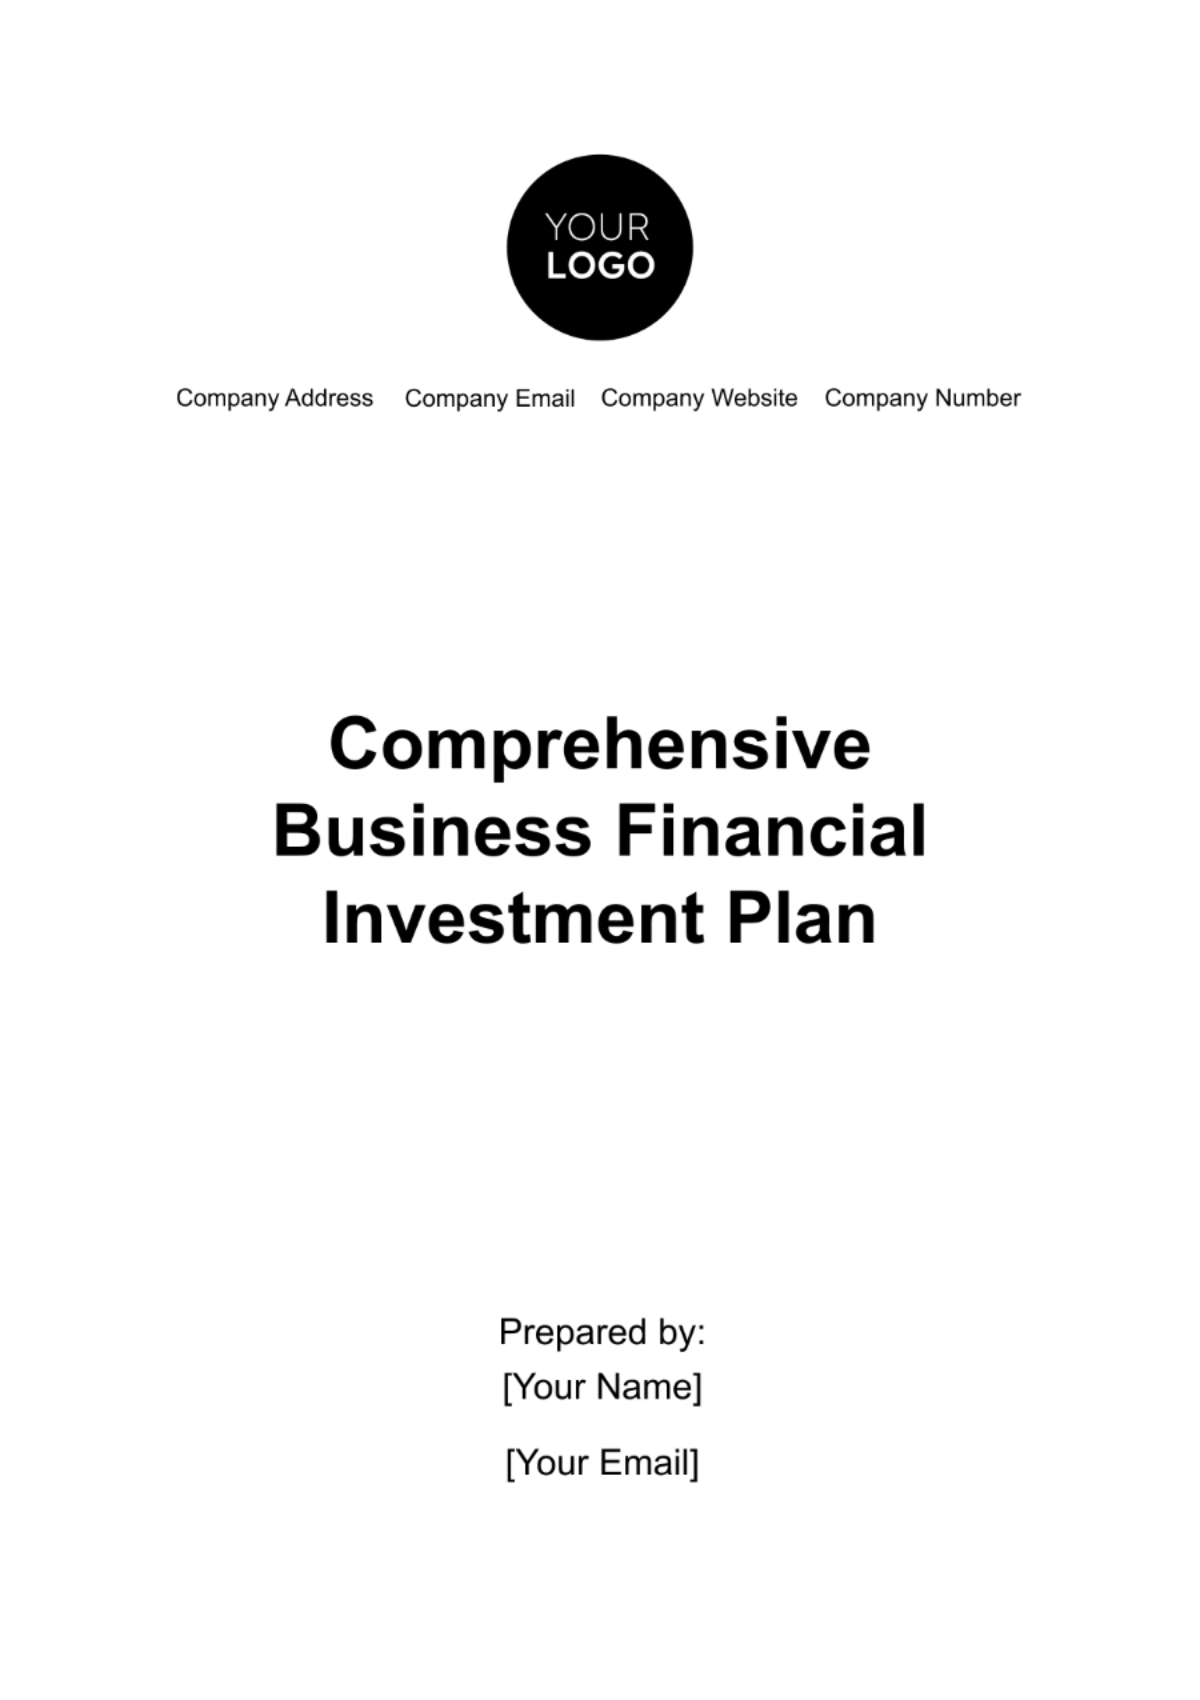 Comprehensive Business Financial Investment Plan Template